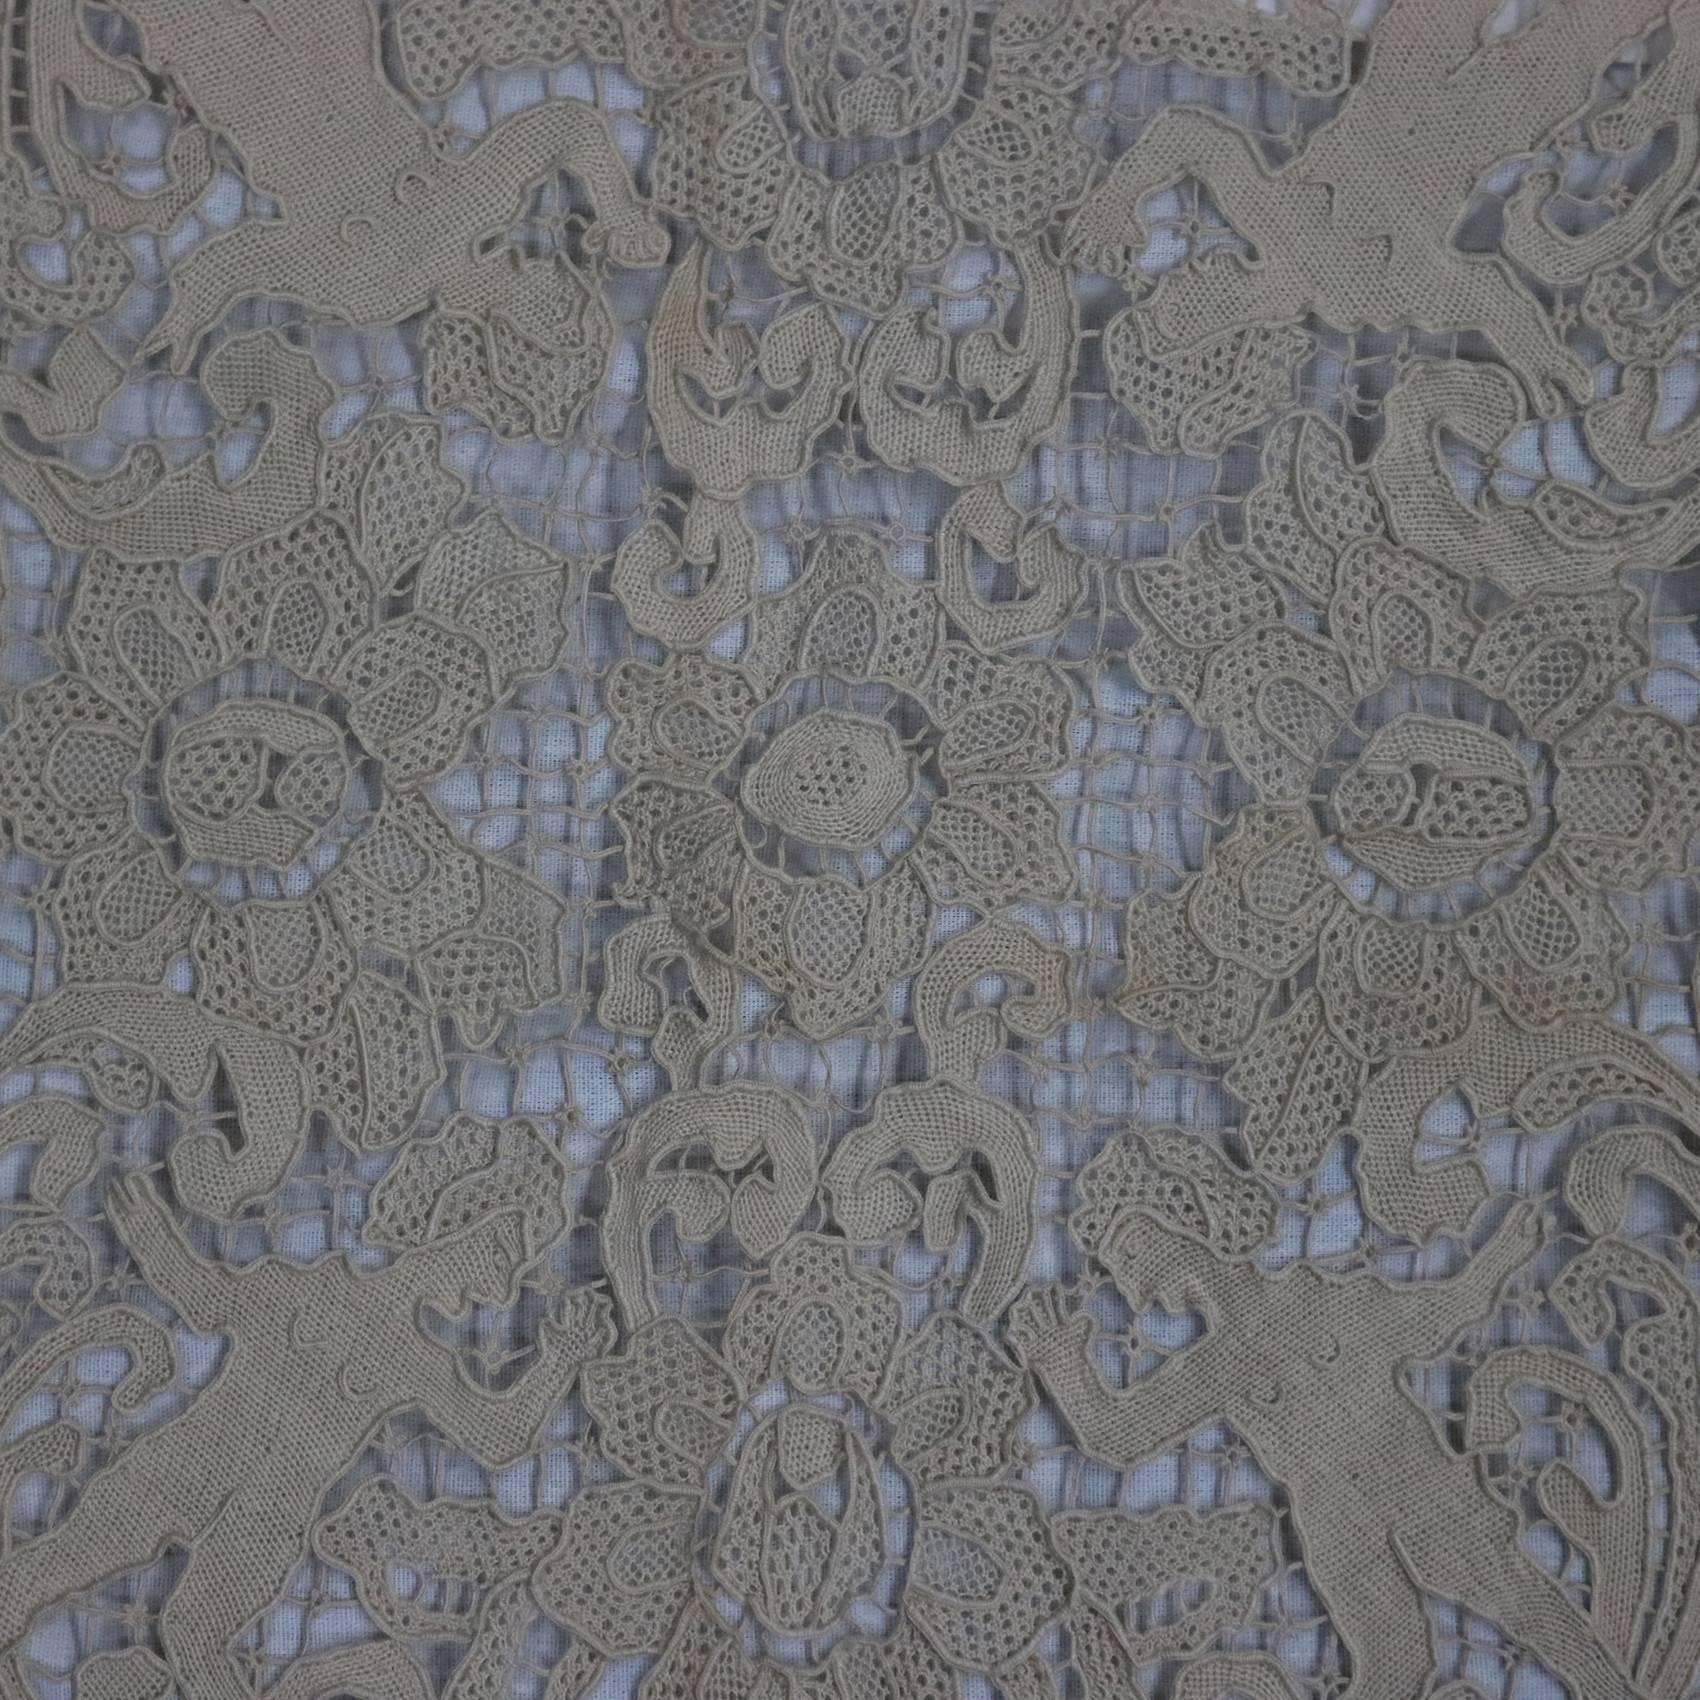 Neoclassical Large Antique Handmade Belgian Zele Figural Needle Lace Table Cloth, 19th C